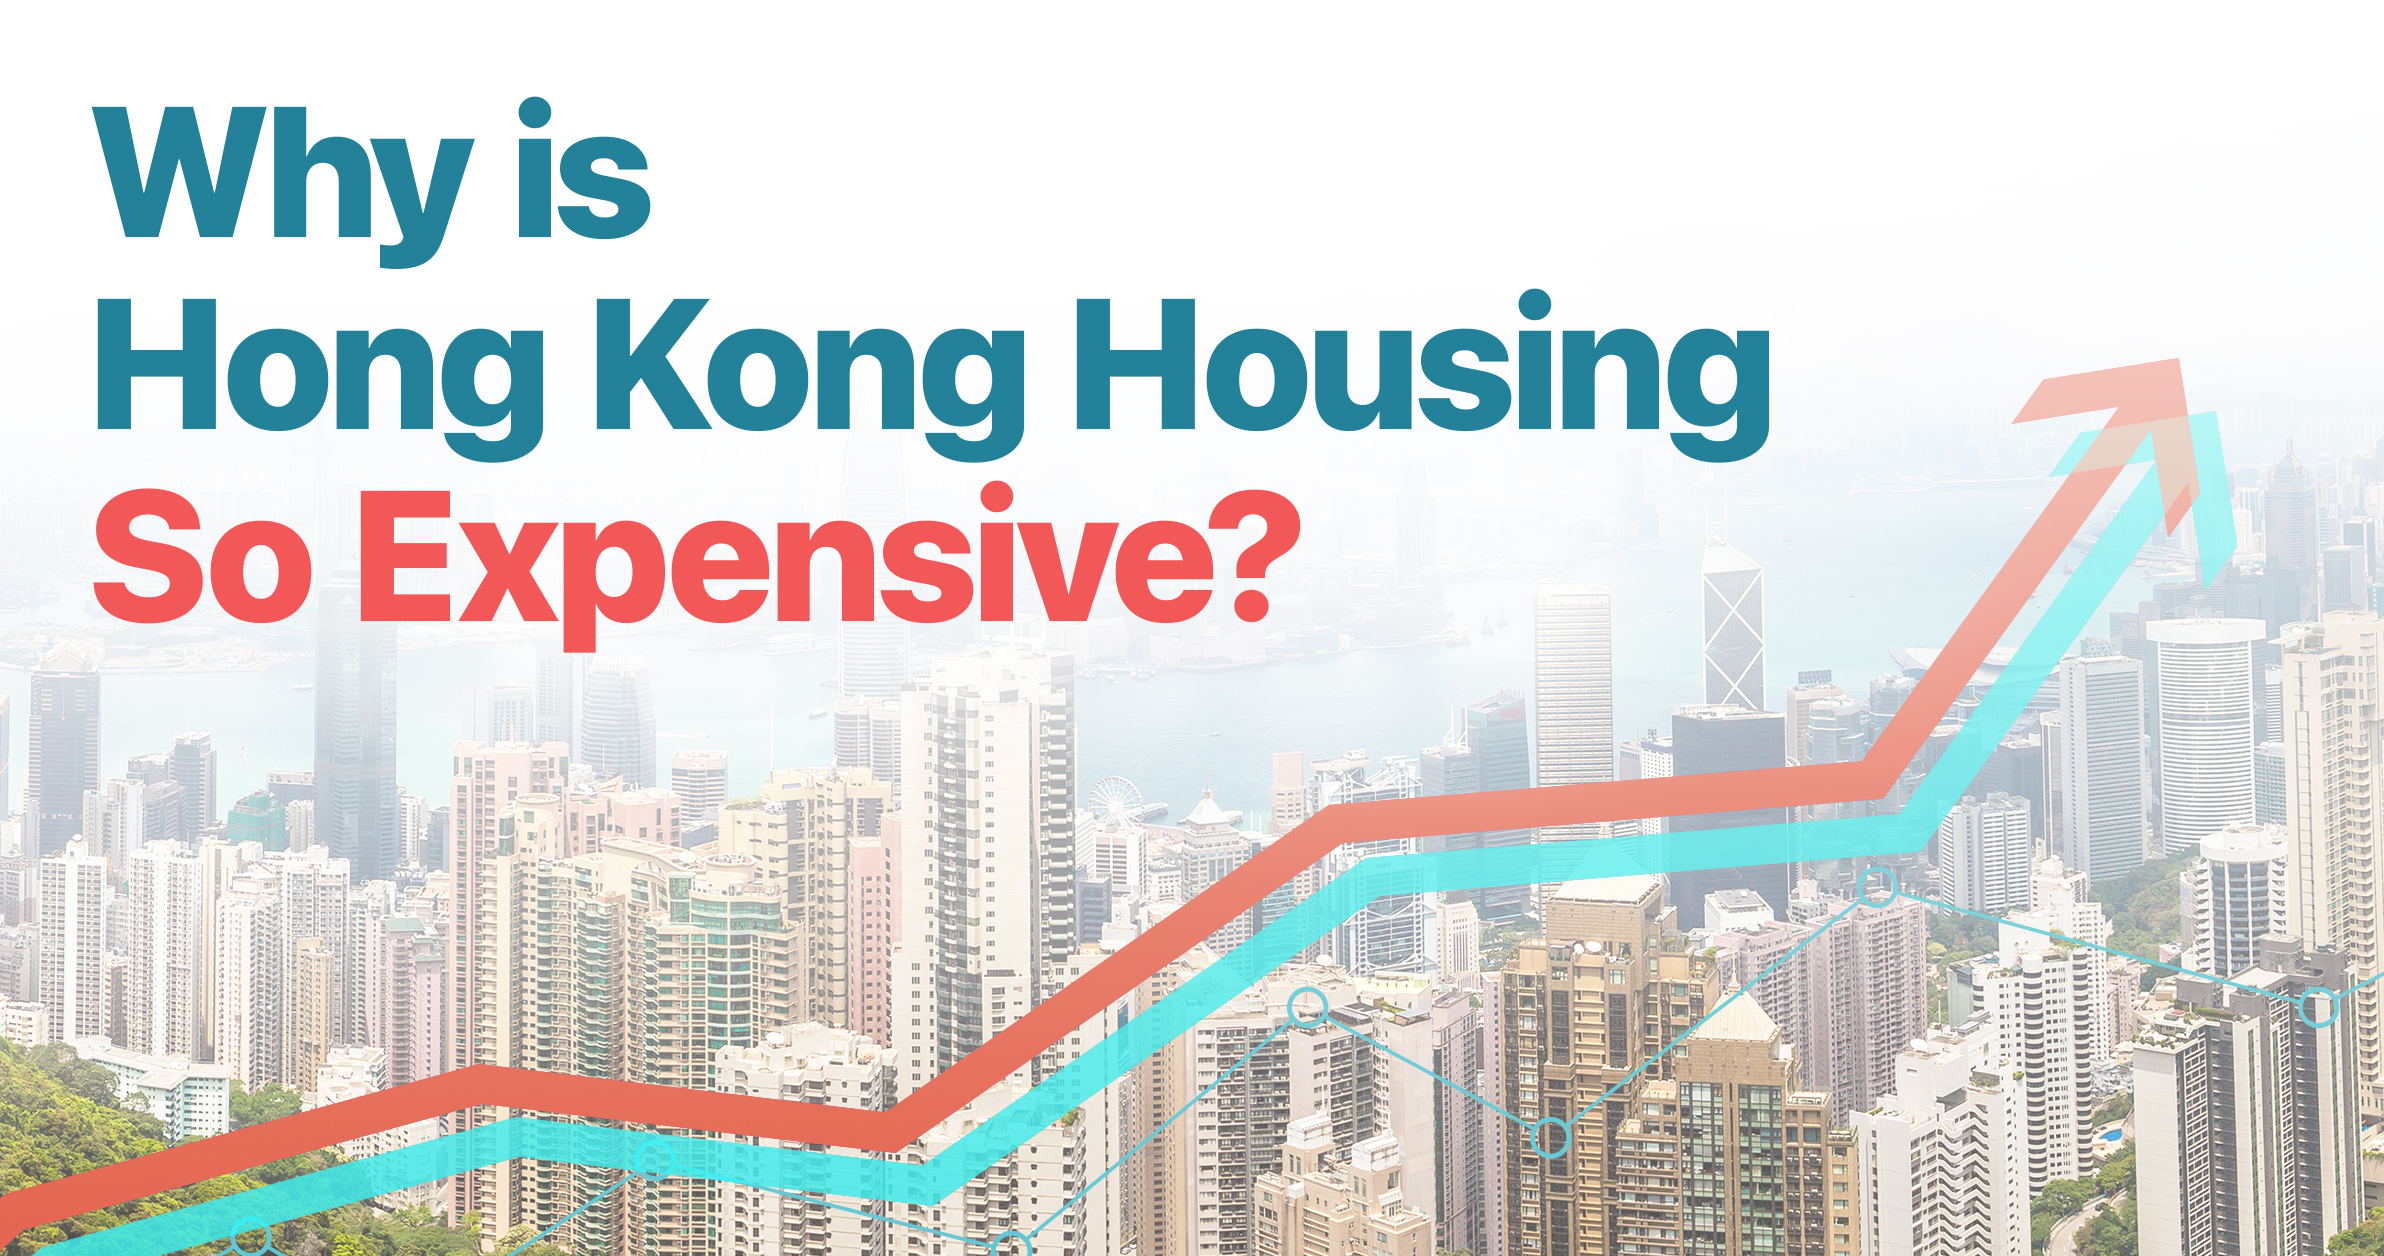 Why is Hong Kong Housing So Expensive?